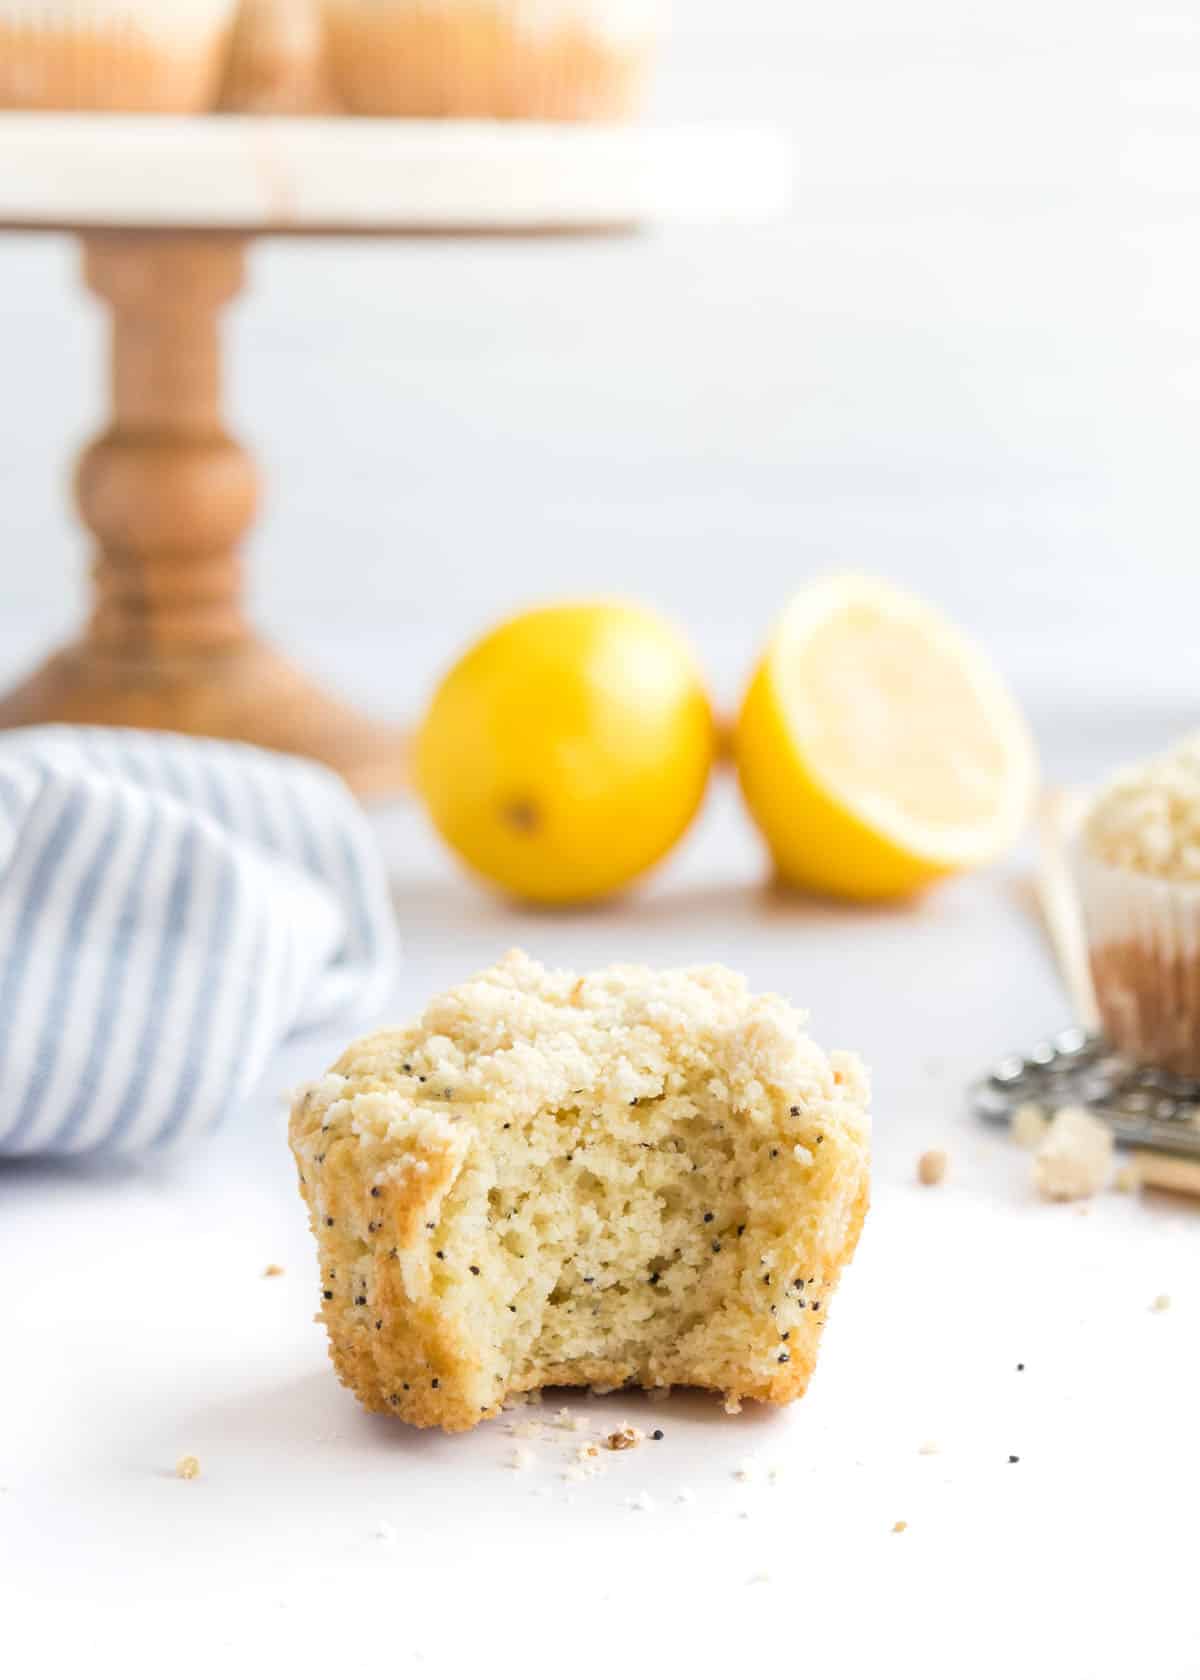 A lemon poppy seed muffin with a bite taken out of it on a countertop.